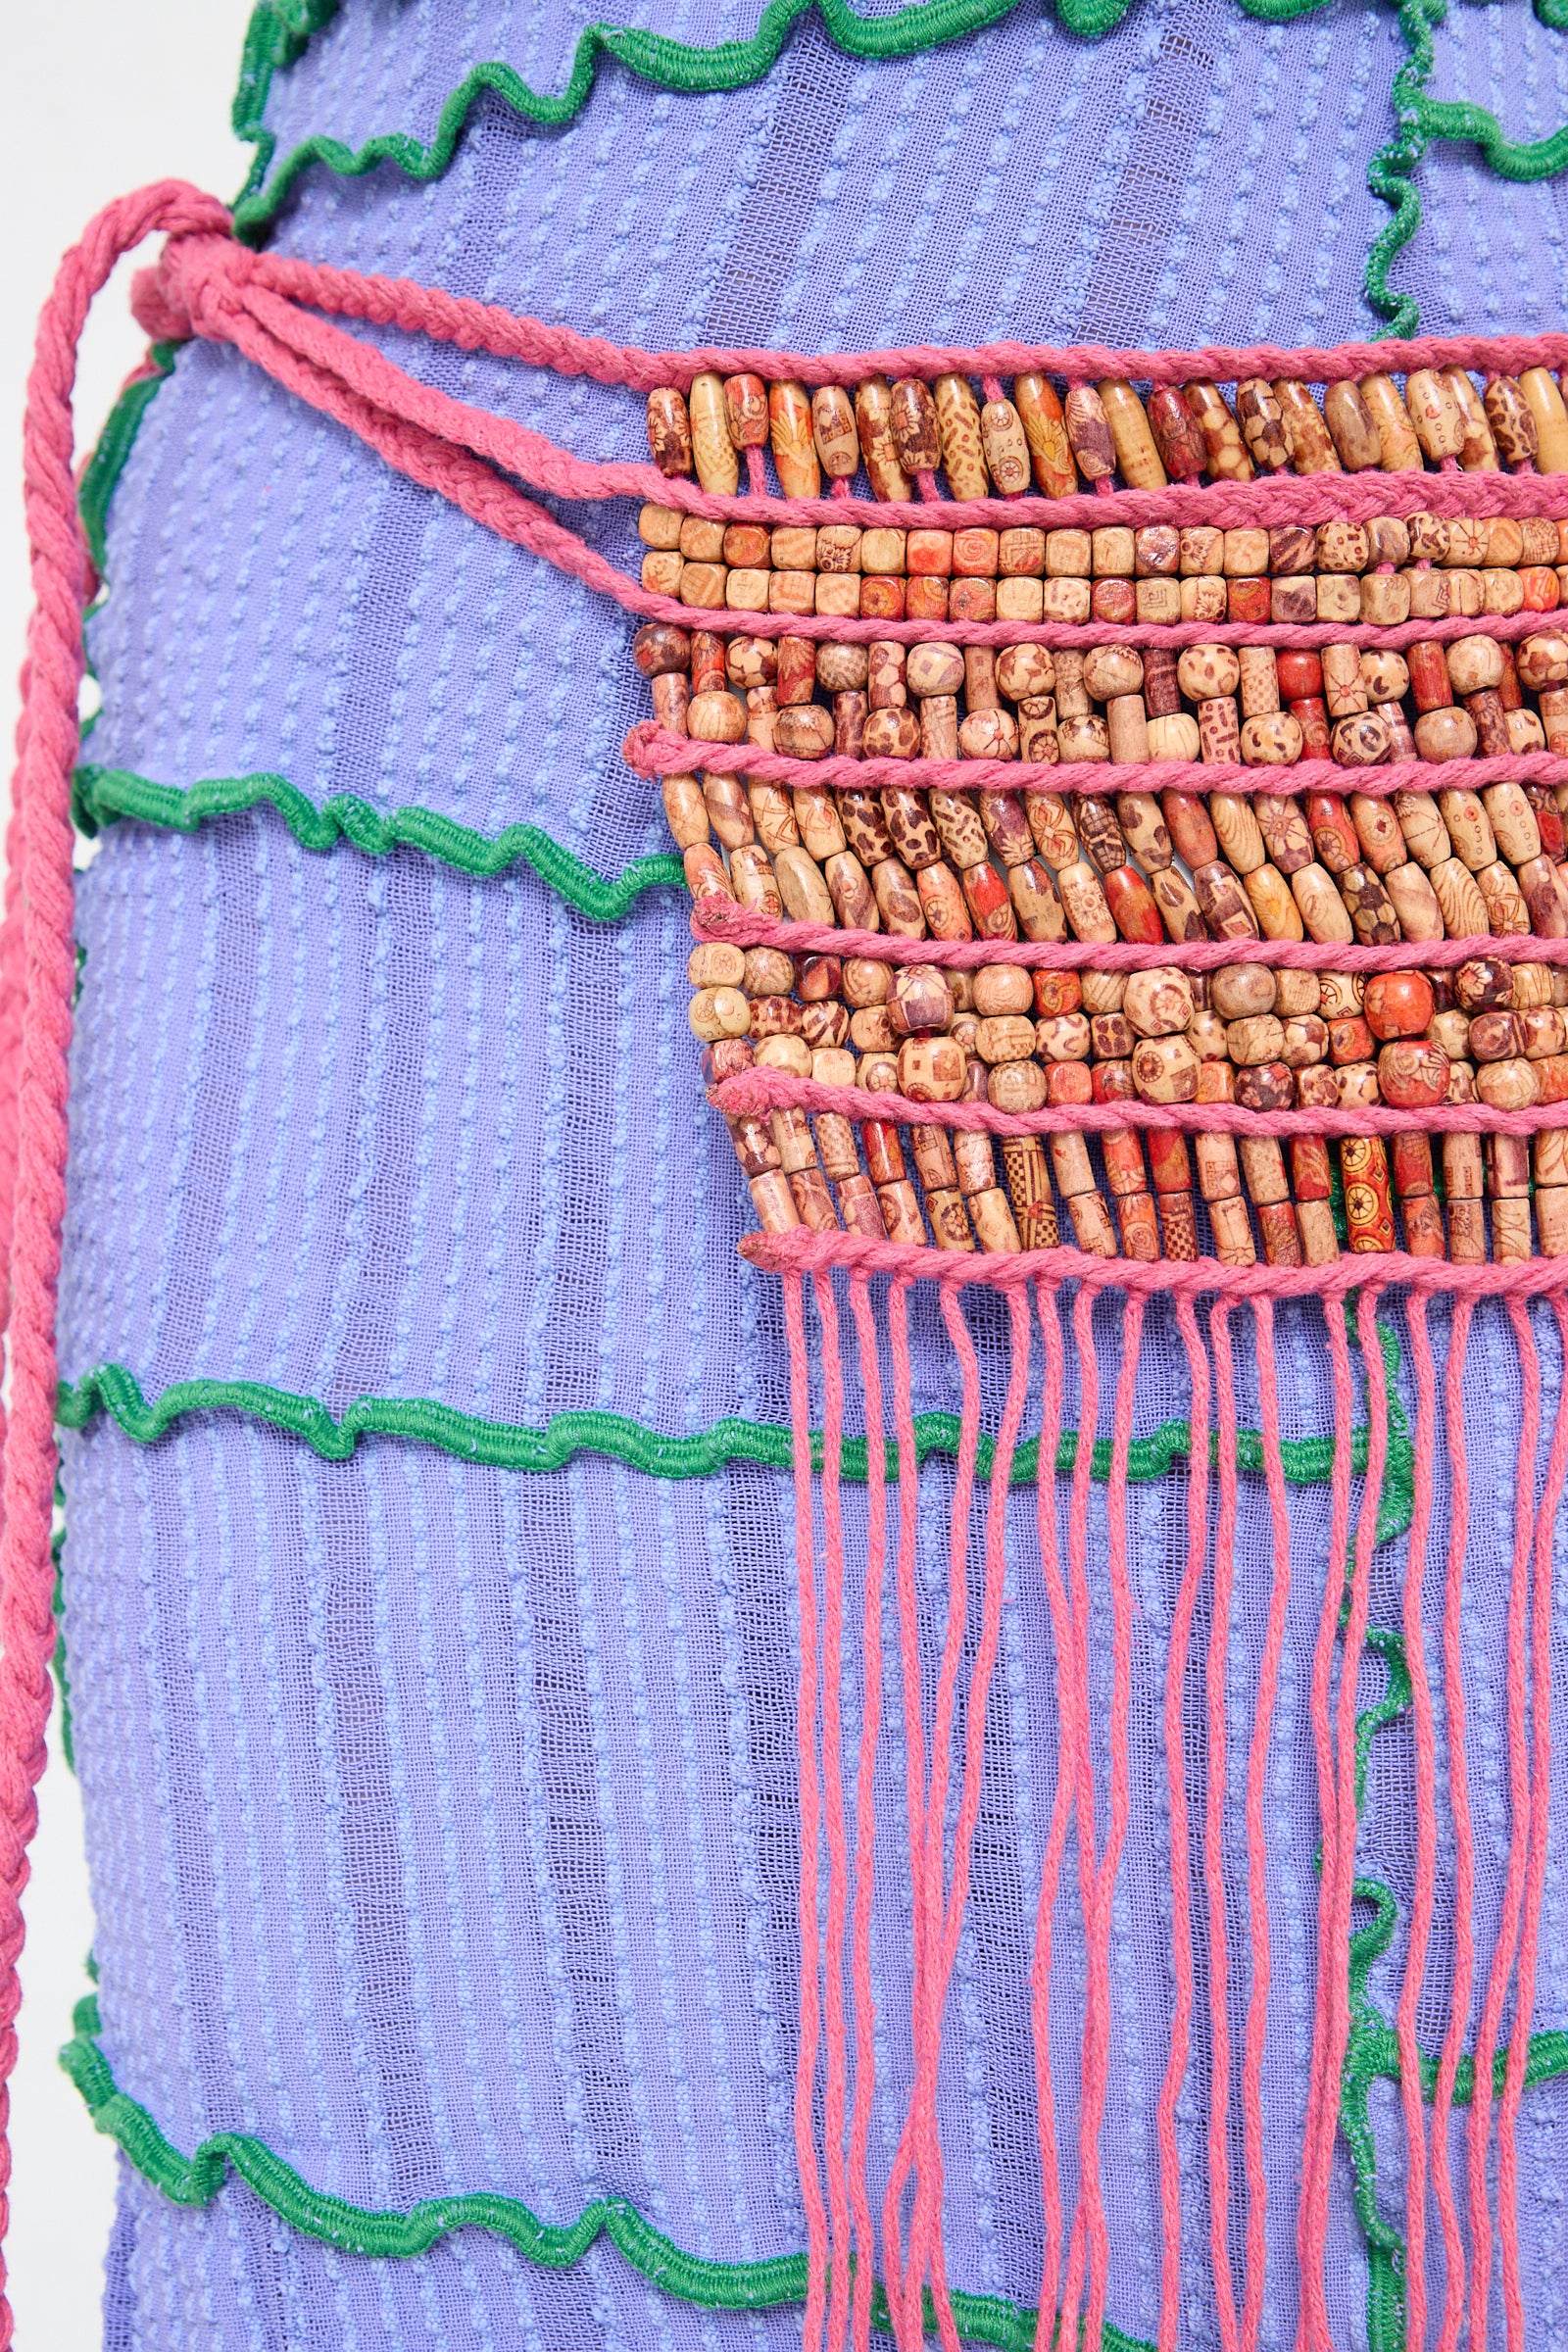 A Luna Del Pinal belt with wooden beads and tassels on it.